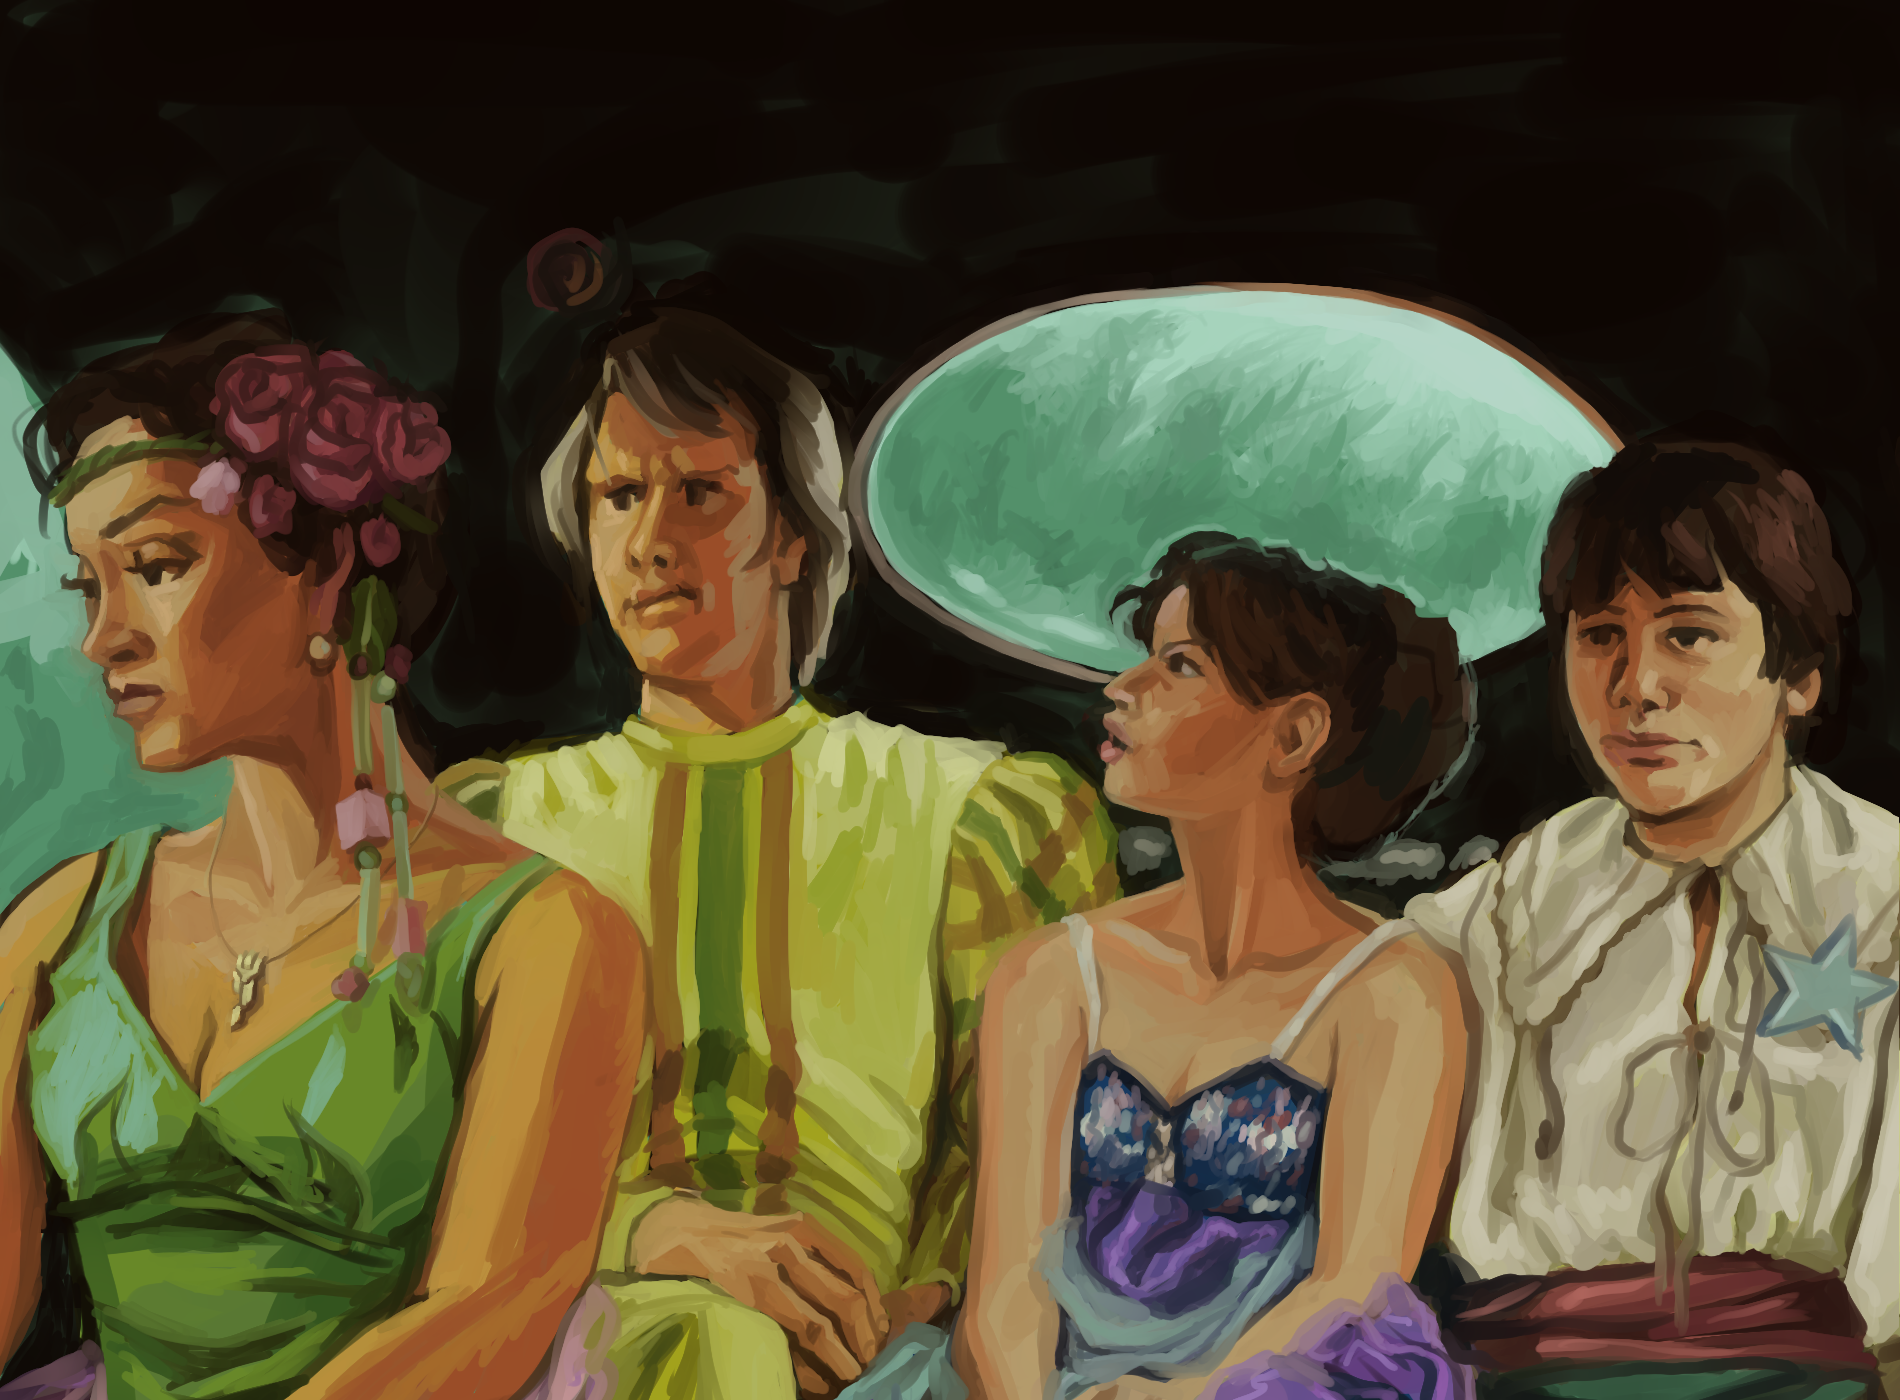 Digital painting of a screenshot from the Doctor Who episode Black Orchid. It shows the fifth Doctor and his three companions in the back of an old Edwardian police car. They are all dressed for a costume party, with the doctor in a jester-like outfit, Nyssa in a purple and blue sparkly dress, Tegan in a green flowery dress with roses in her hair, and Adric dressed as a pirate with his blue star pin for mathematical excellence pinned to his chest.